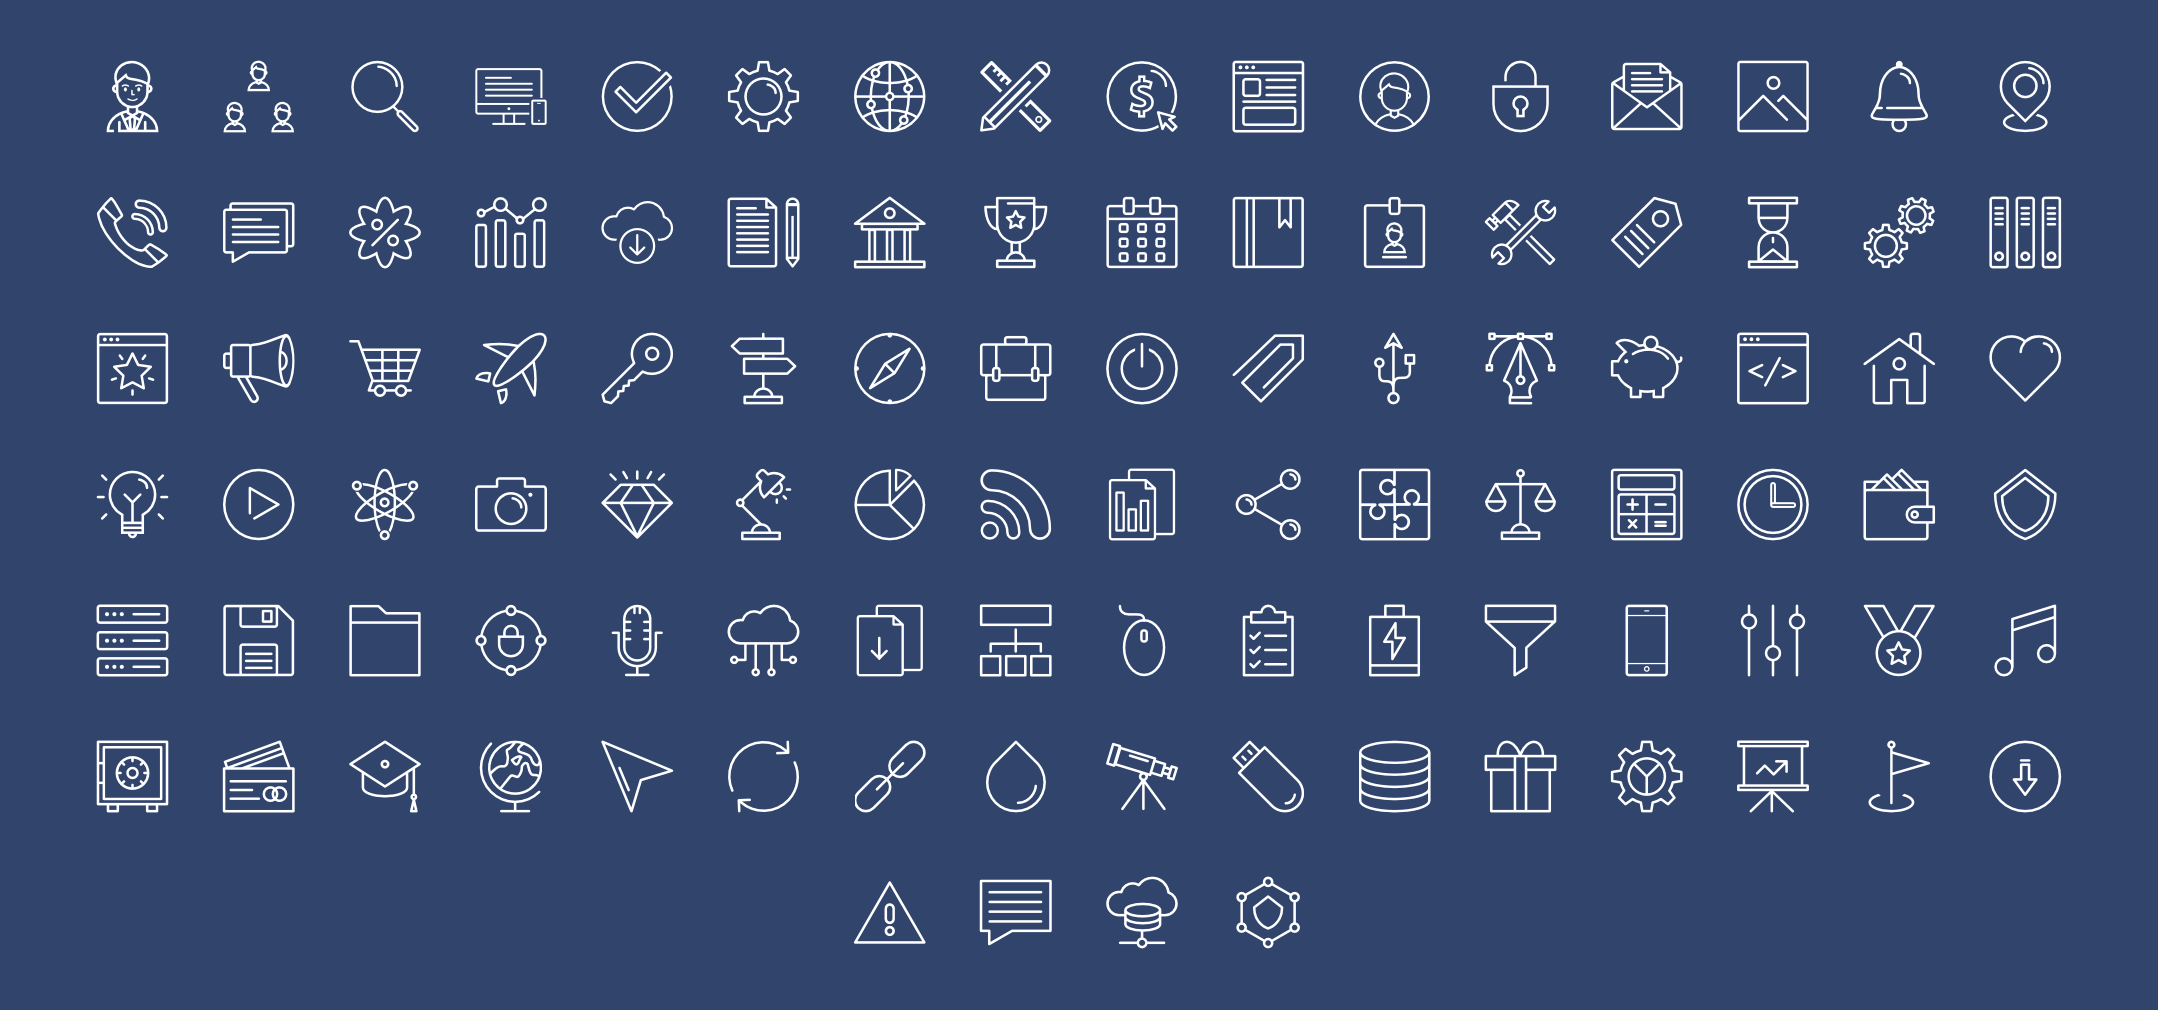 120 FLAT ICONS PACK Royalty Free Stock SVG Vector and Clip Art